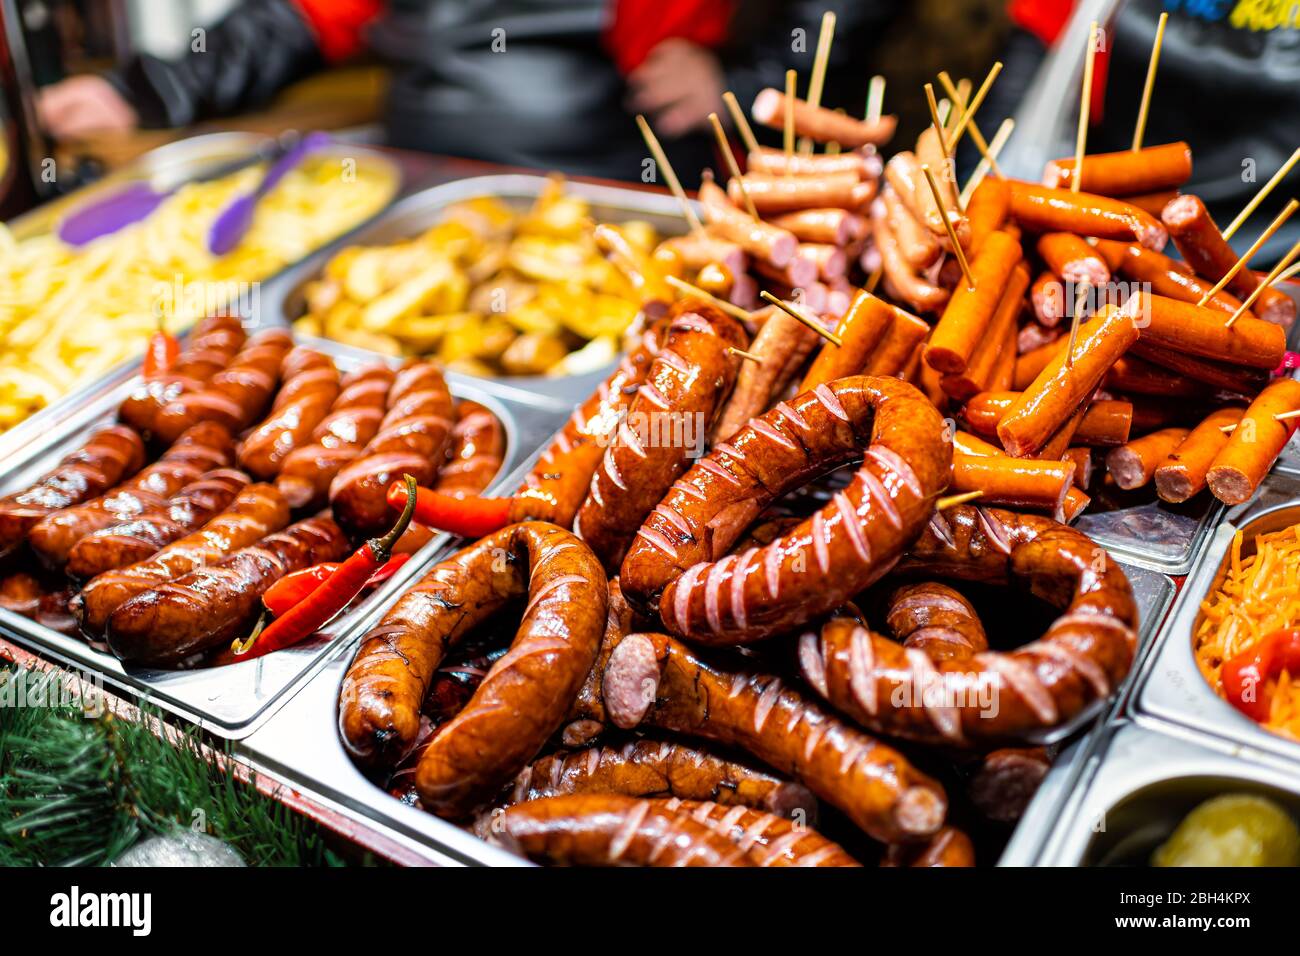 Lviv, Ukraine Christmas winter market food buffet fast restaurant table display with traditional salami smoked sausages meat in trays Stock Photo